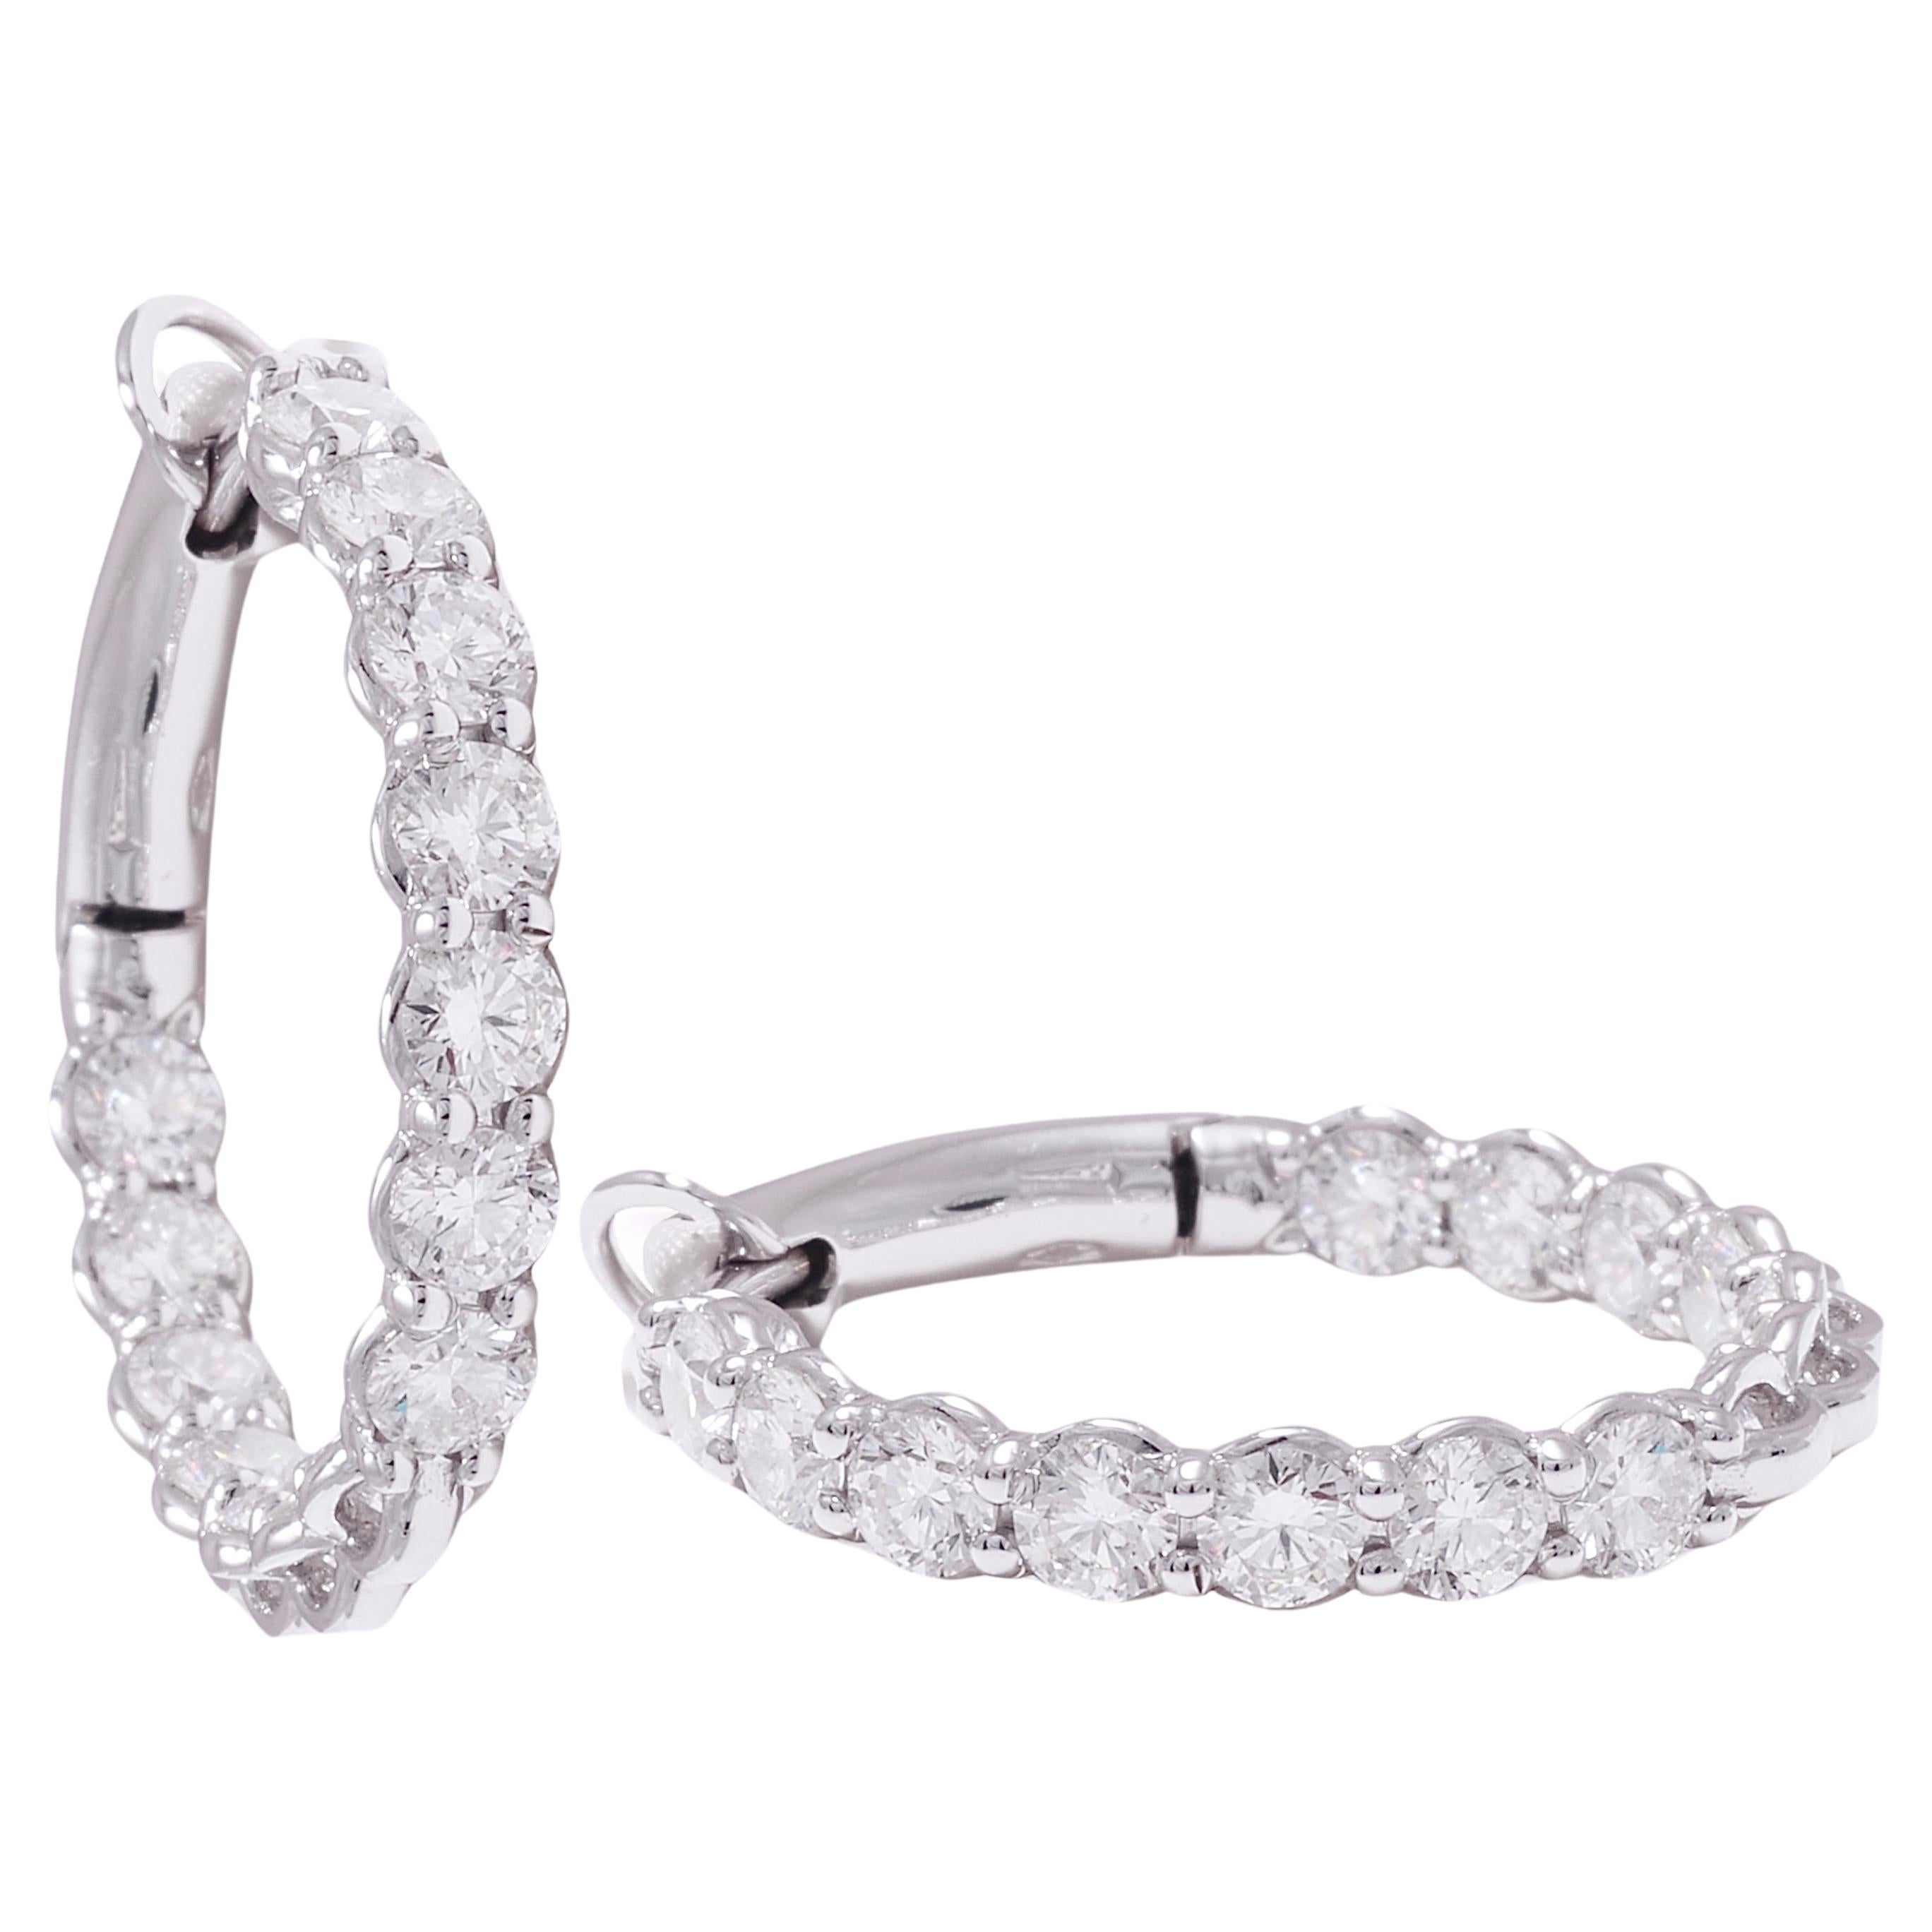  18 kt. White Gold Loop Earrings With 3.14 ct. Diamonds  For Sale